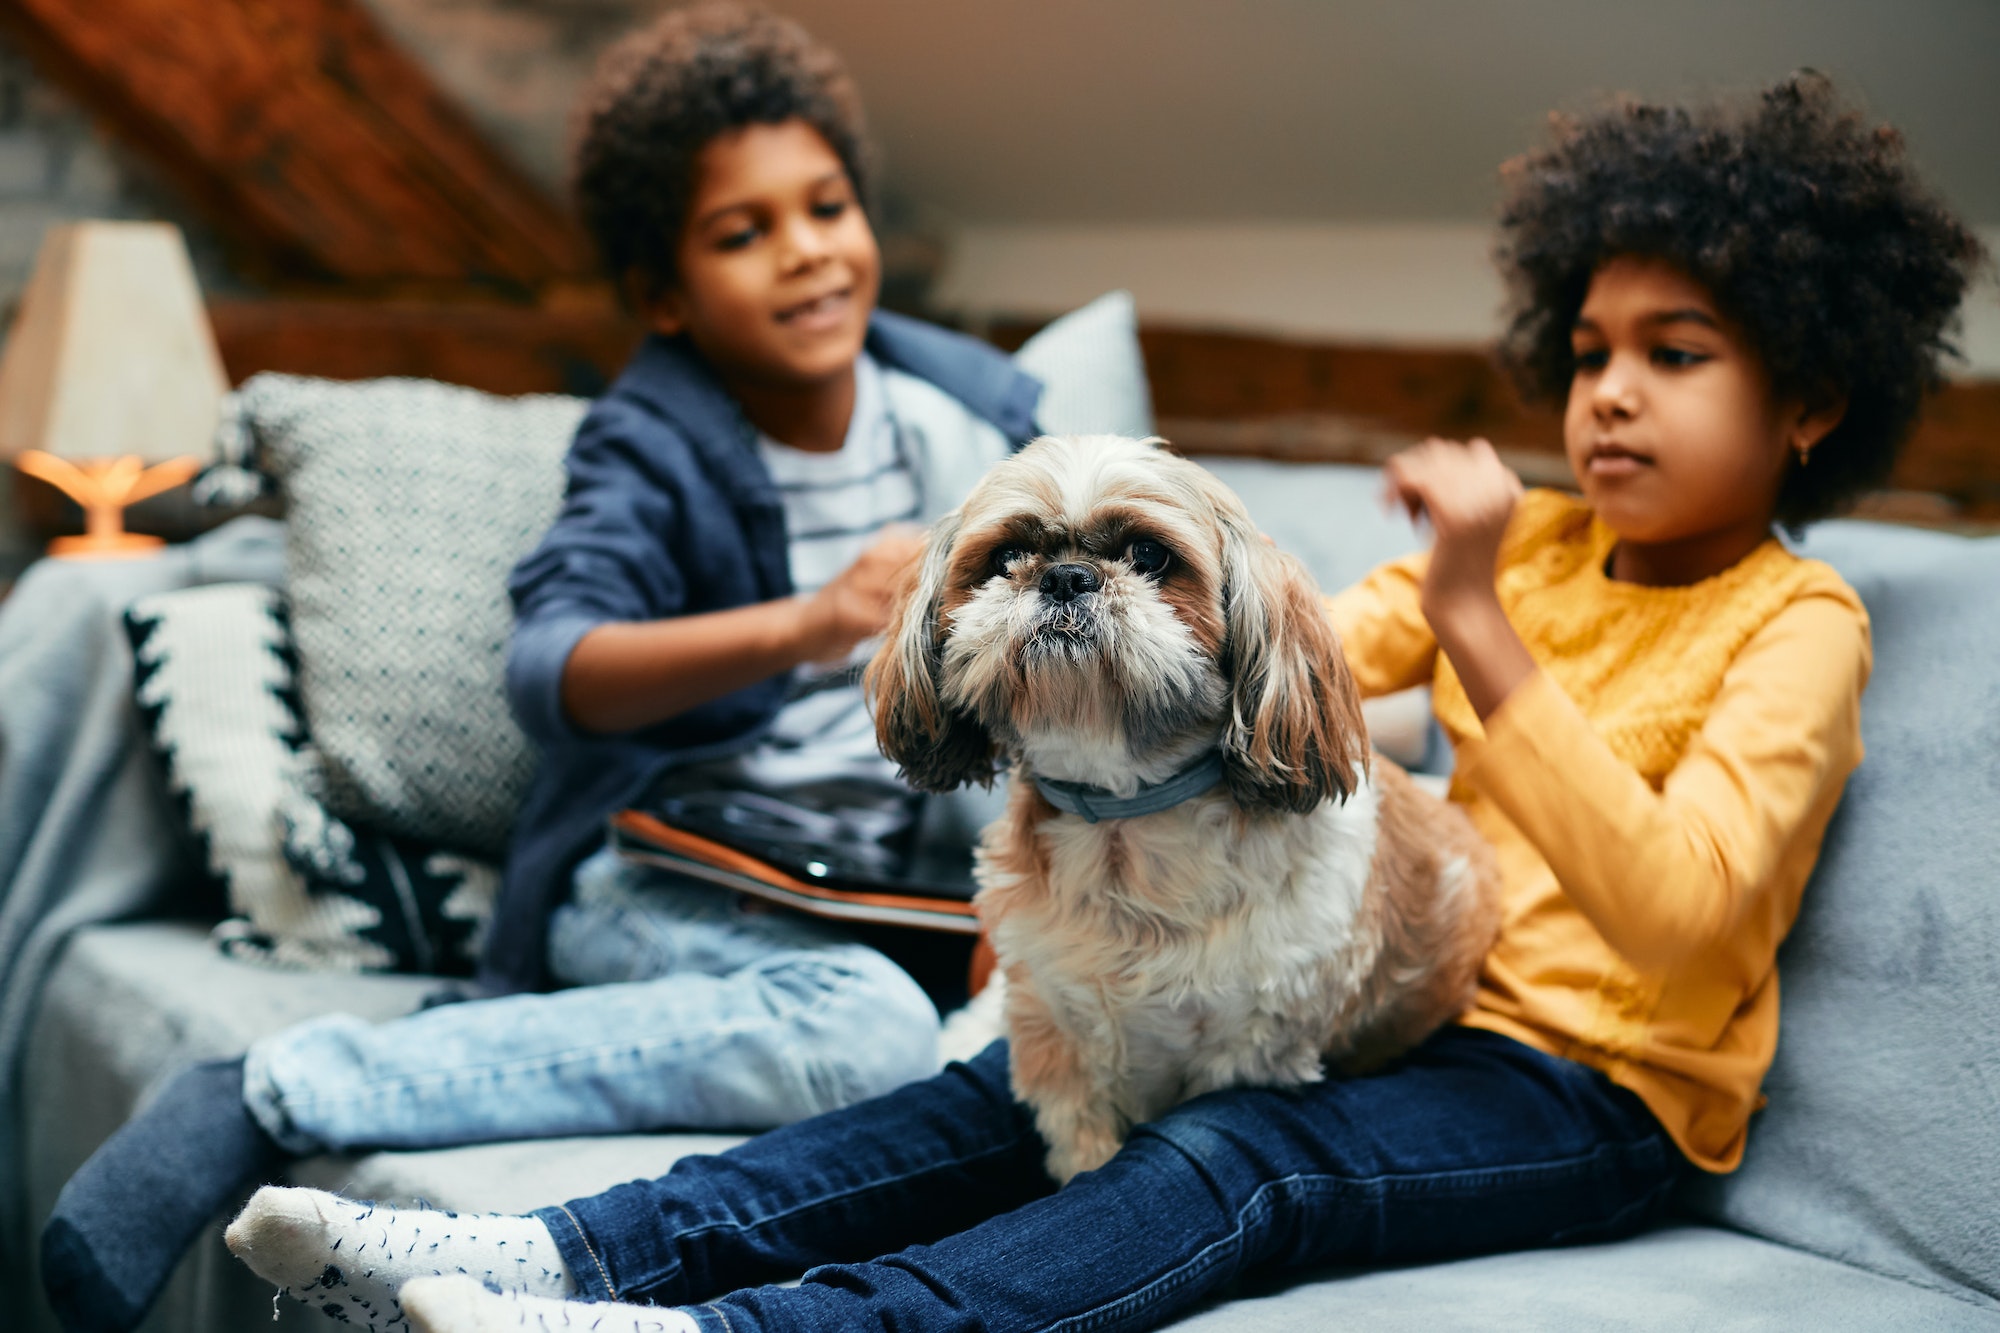 Small black kids enjoying with their dog in the living room.